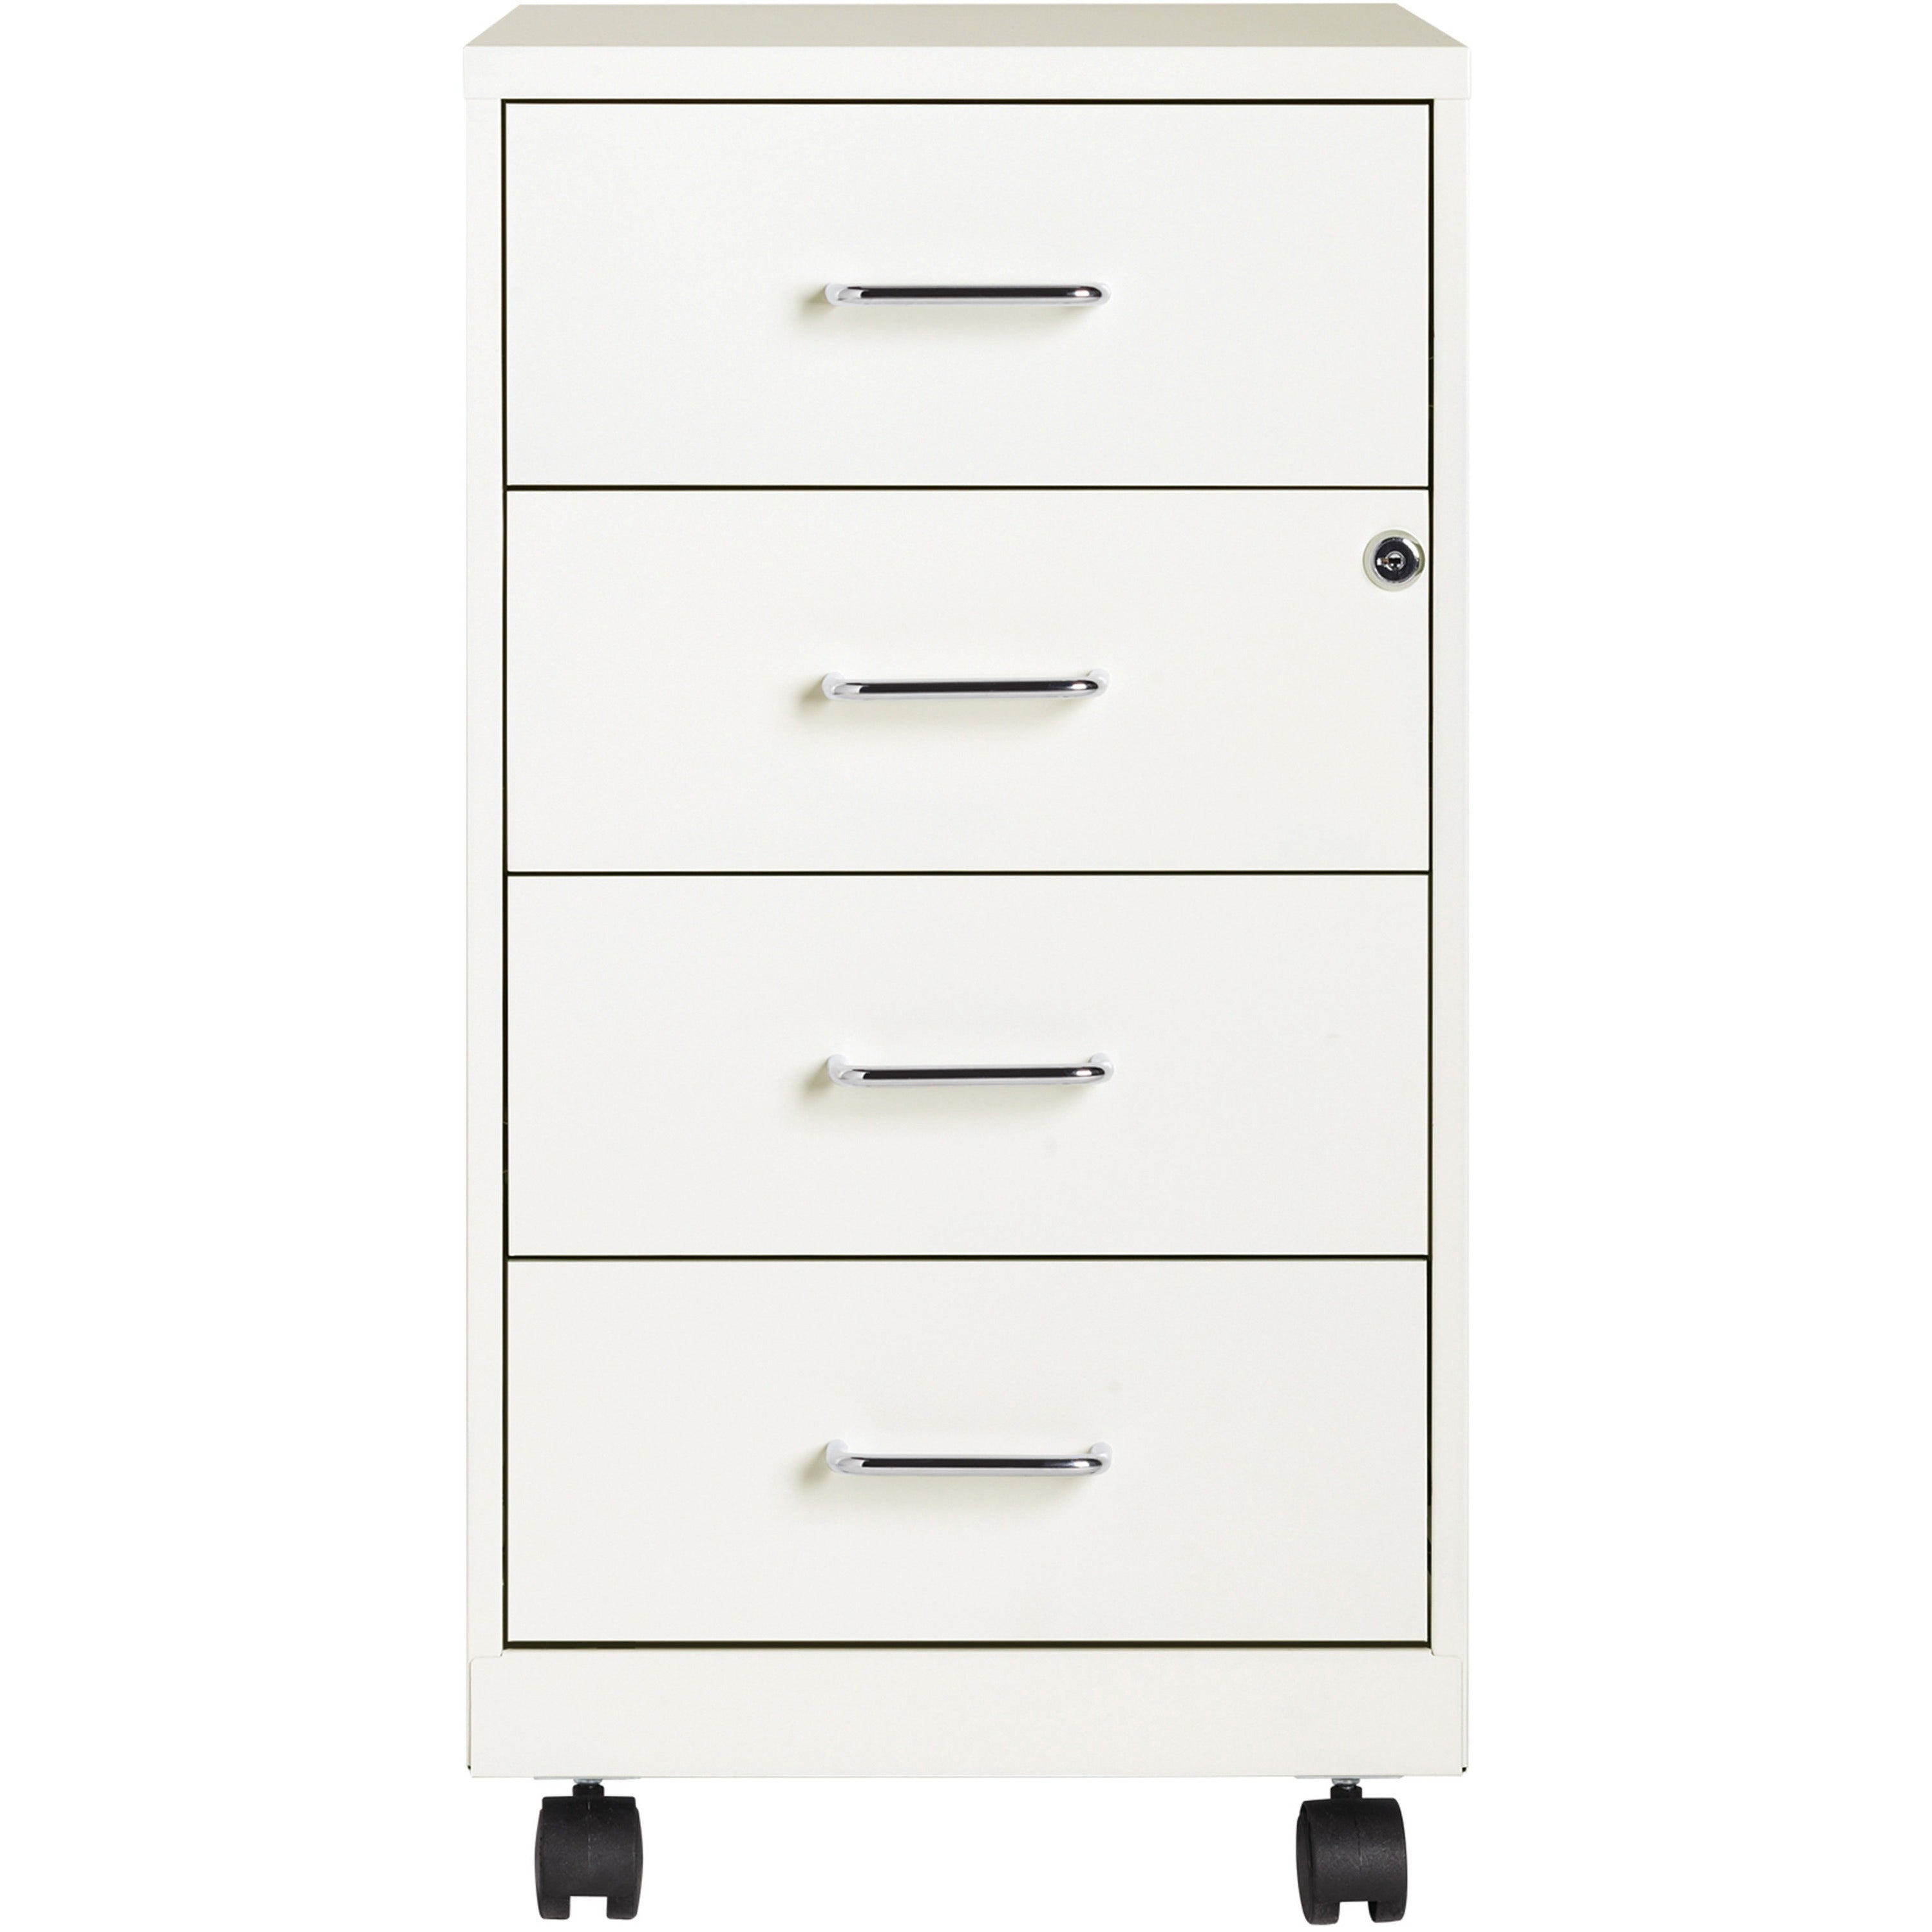 nusparc-mobile-storage-cabinet-142-x-18-x-265-4-x-drawers-letter-legal-mobility-glide-suspension-anti-tip-nonporous-surface-cam-lock-3-4-drawer-extension-white-painted-steel-recycled_nprvf418dmwe - 2